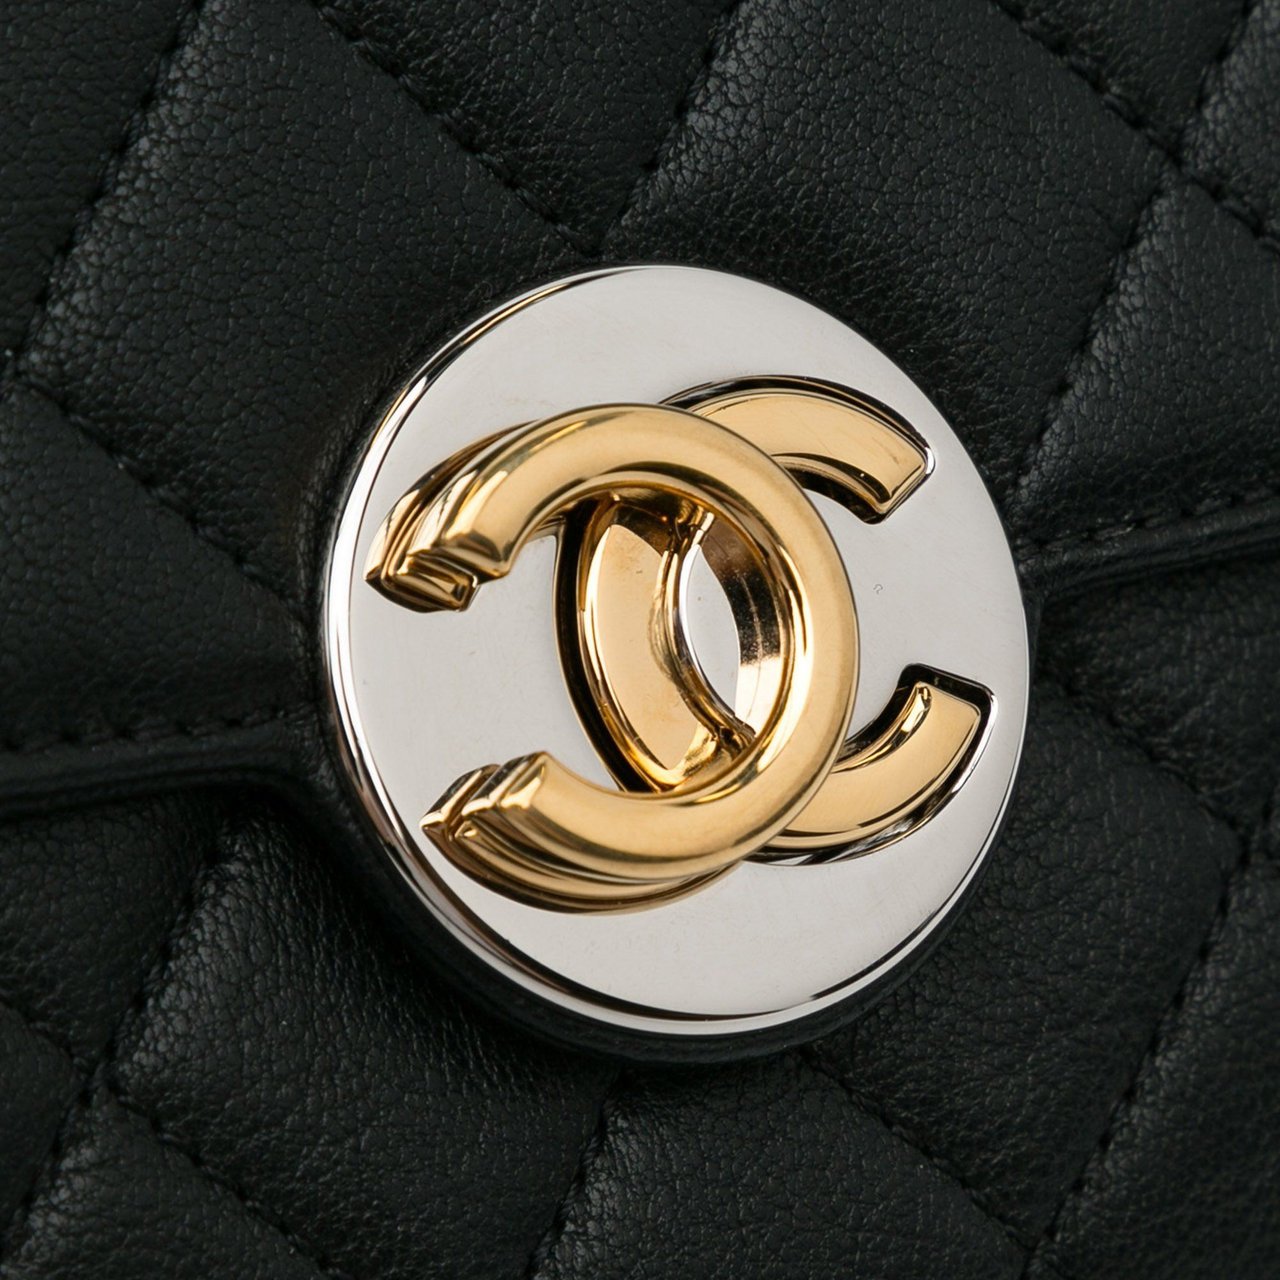 Chanel Quilted Classic Single Flap Zwart